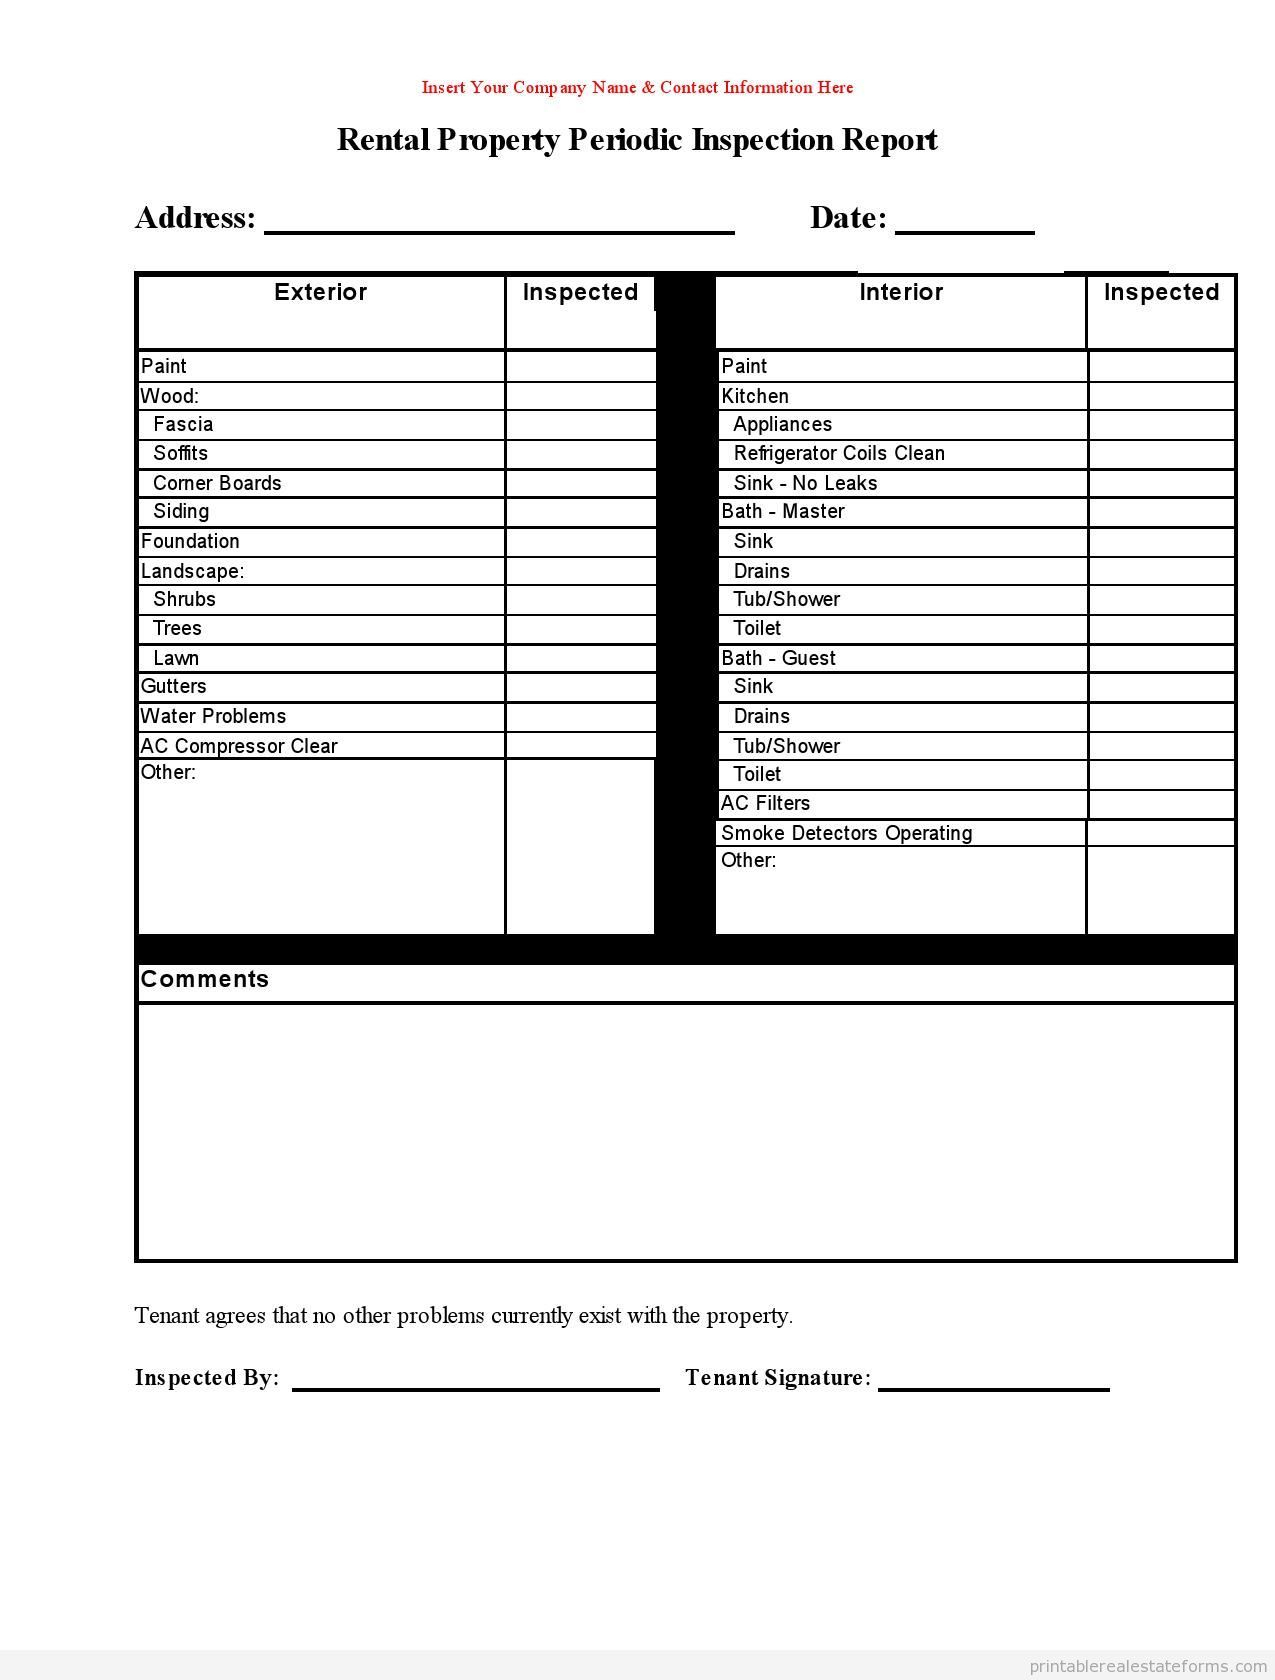 Free Printable Rental Property Periodic Inspection Report Within Commercial Property Inspection Report Template